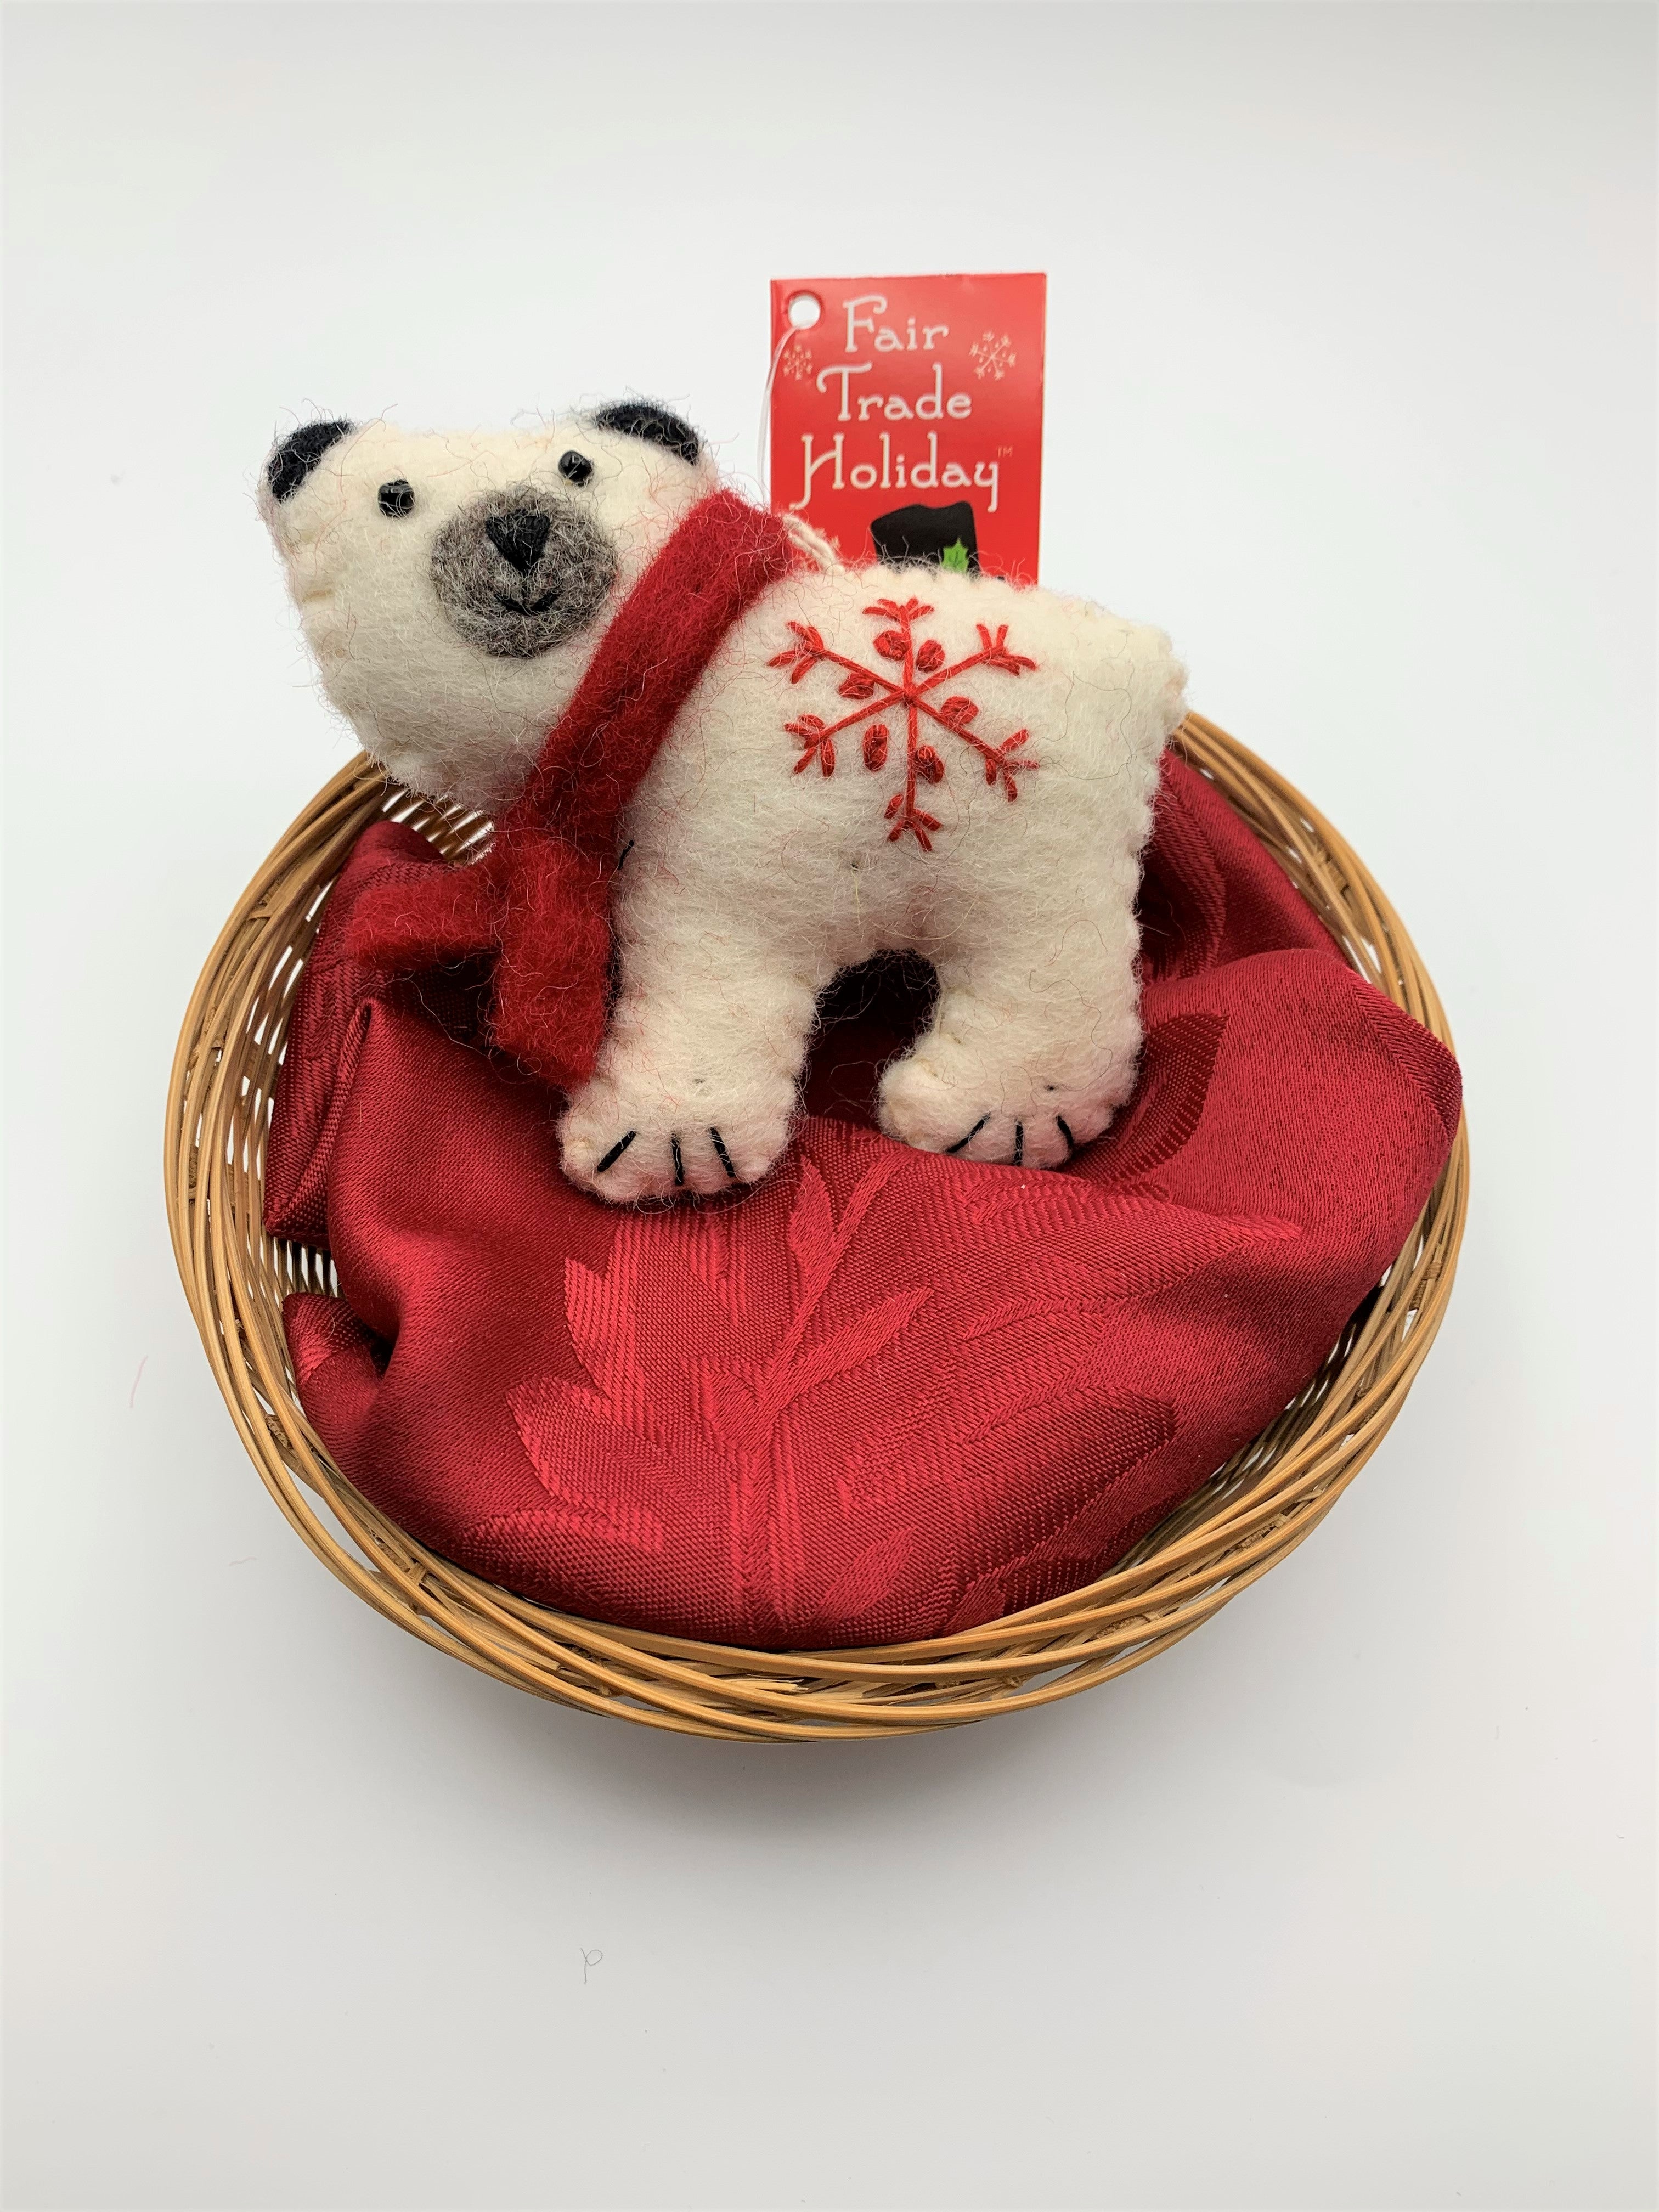 This is a polar bear Christmas ornament that is hand-crafted (fair trade) and made of 100% natural wool. It is off-white with a gray muzzle and black accents (ears, eyes, etc.) and wears a red winter scarf. He has a 'signature' (red) snowflake on his body. Approximately 3.75"x4.2". It comes with a fair trade holiday "to/from" tag to use if giving as a gift.